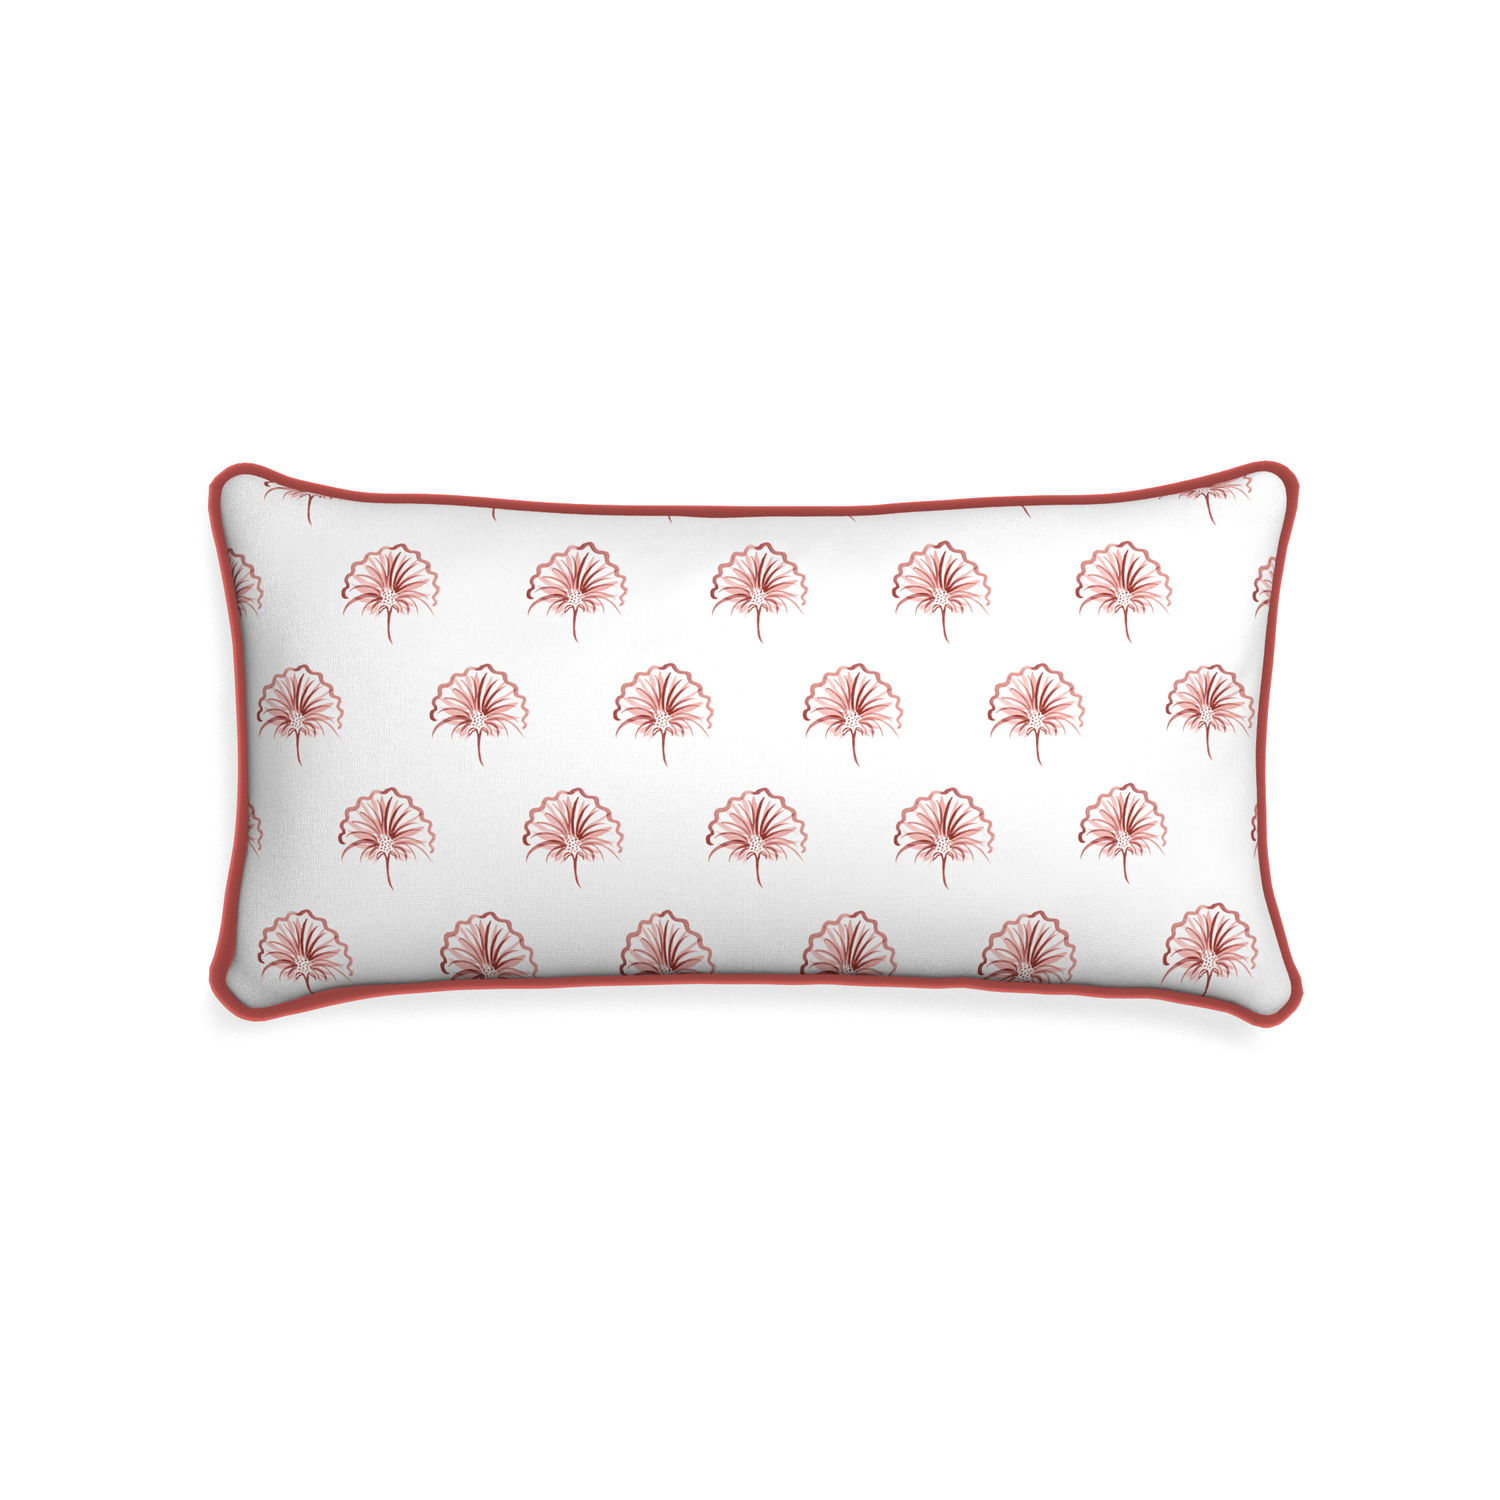 Midi-lumbar penelope rose custom floral pinkpillow with c piping on white background